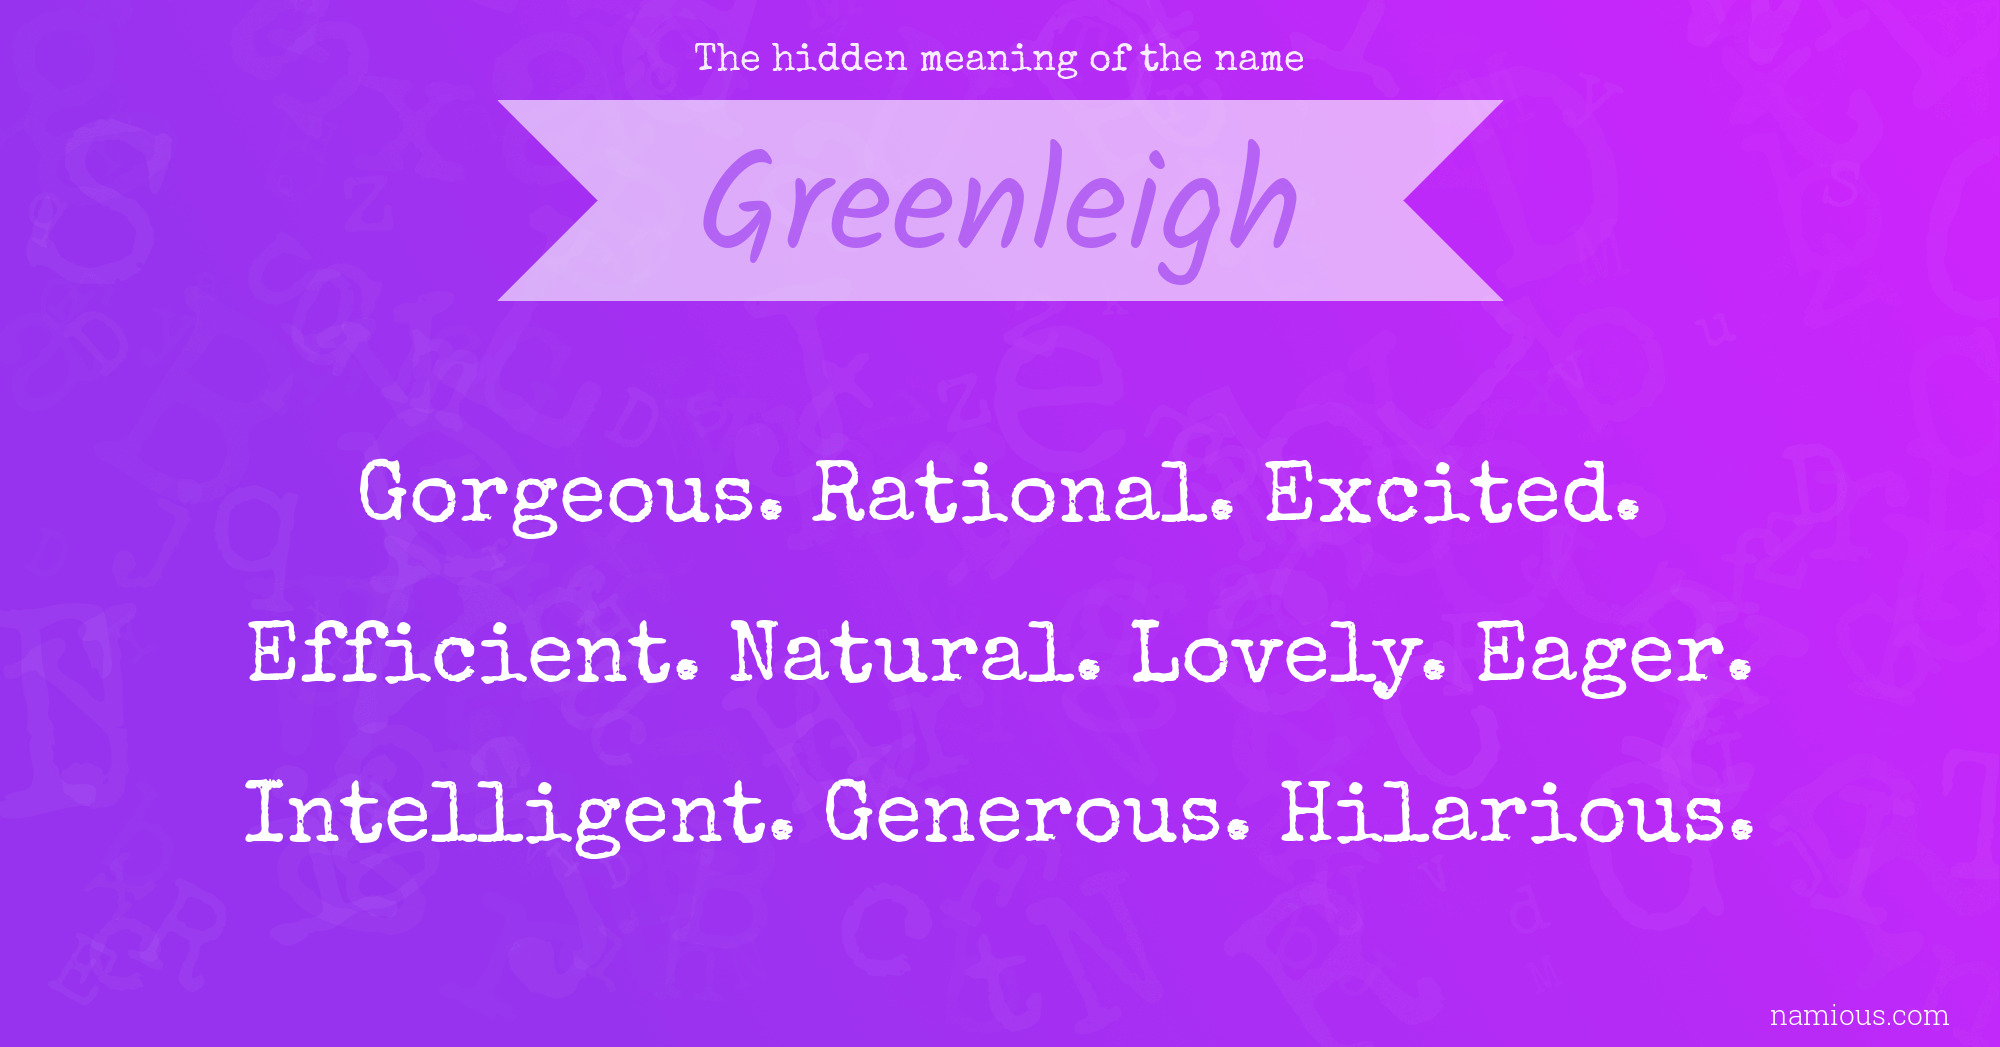 The hidden meaning of the name Greenleigh